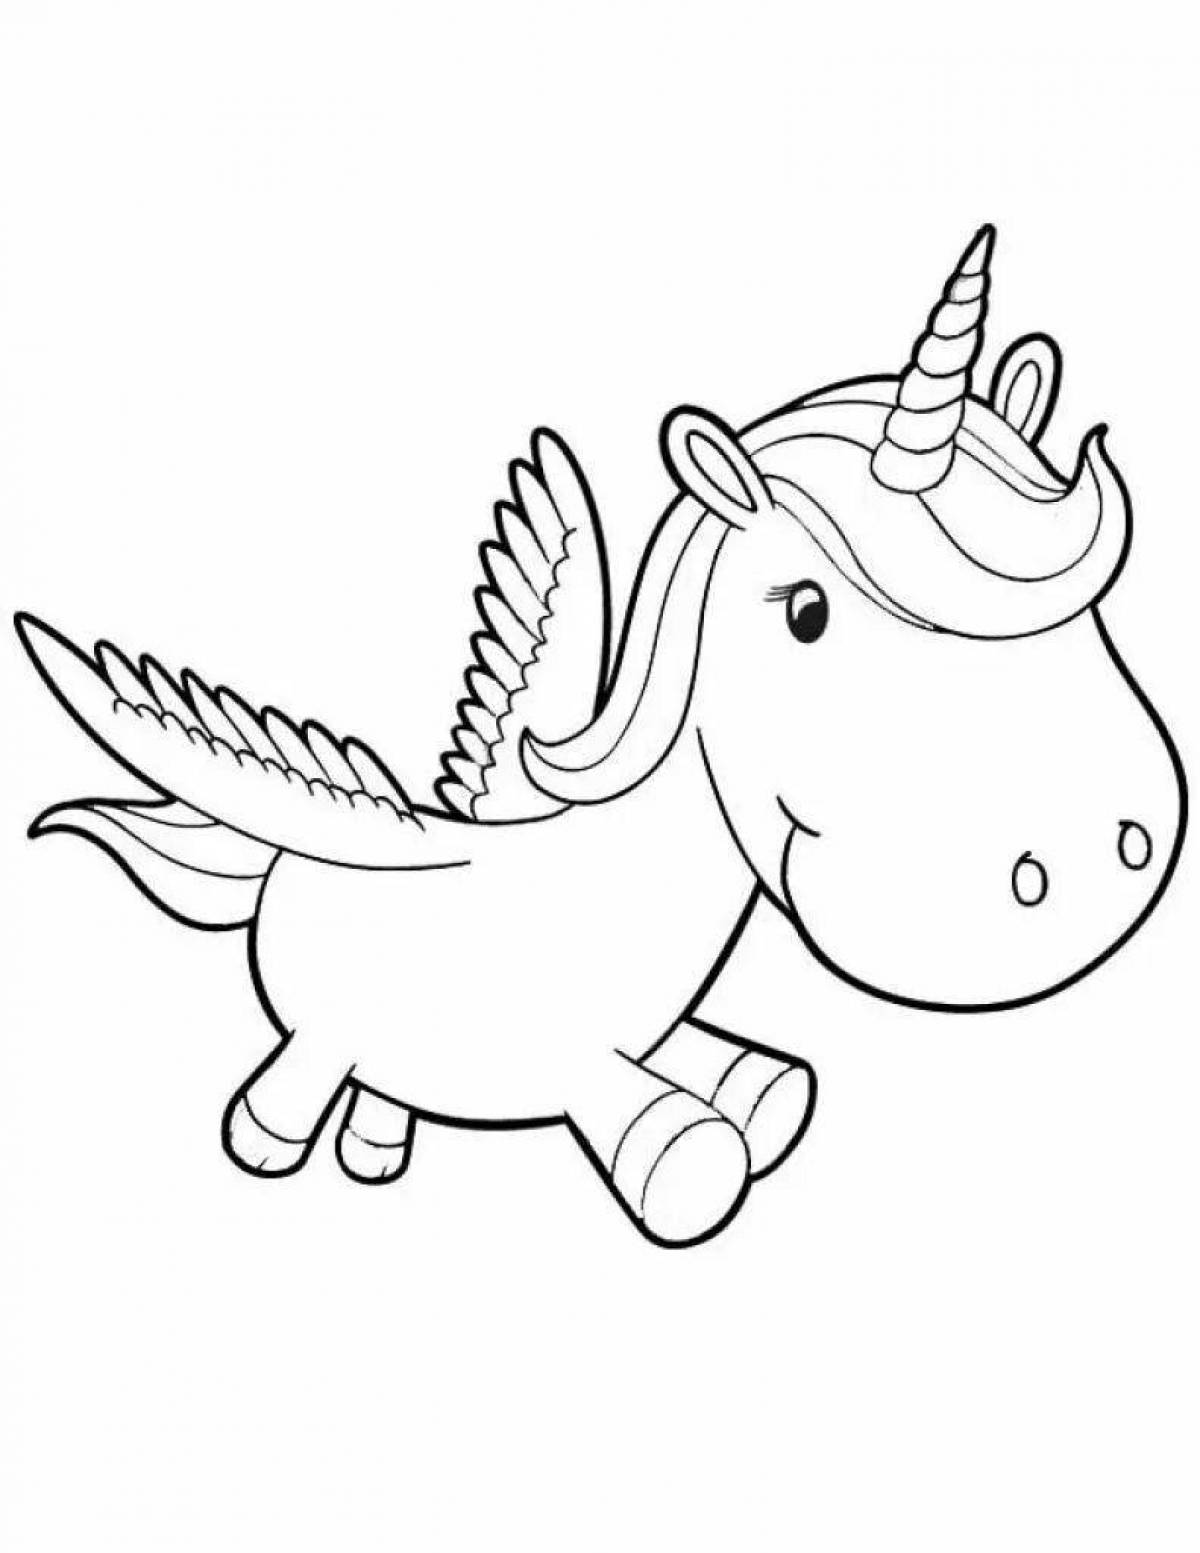 Majestic coloring unicorn with wings